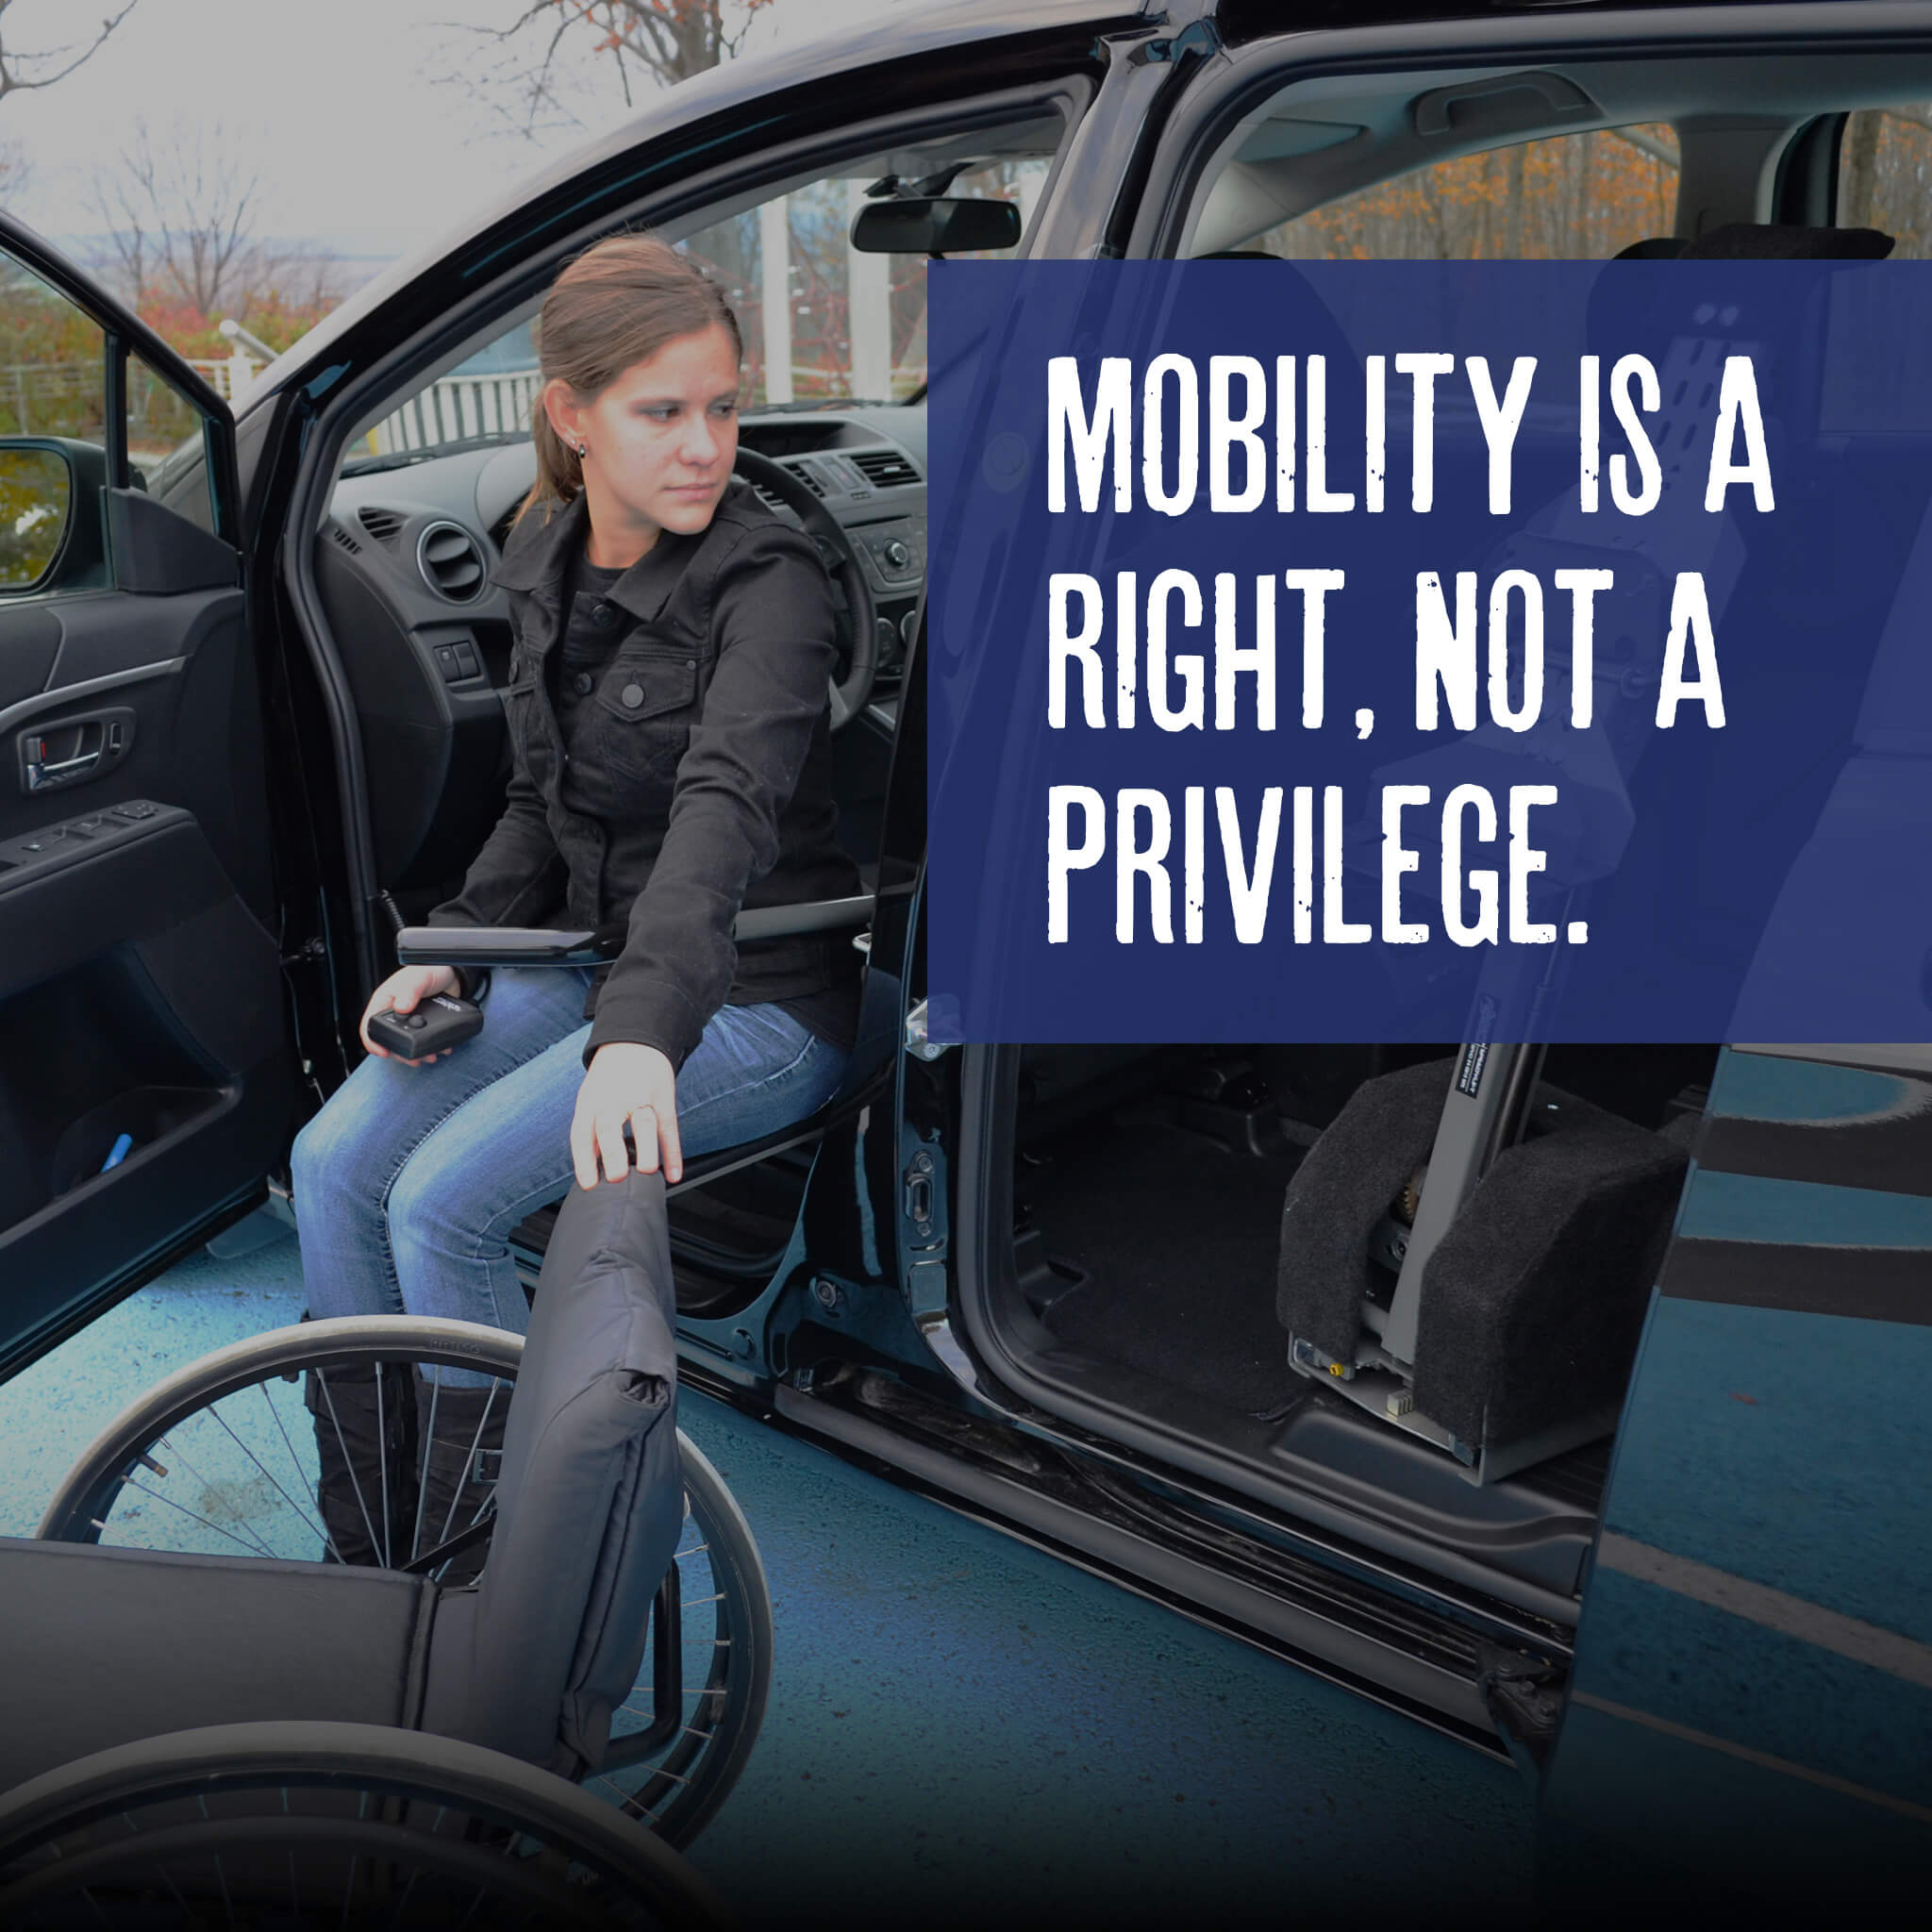 Mobility is a right not a privilege